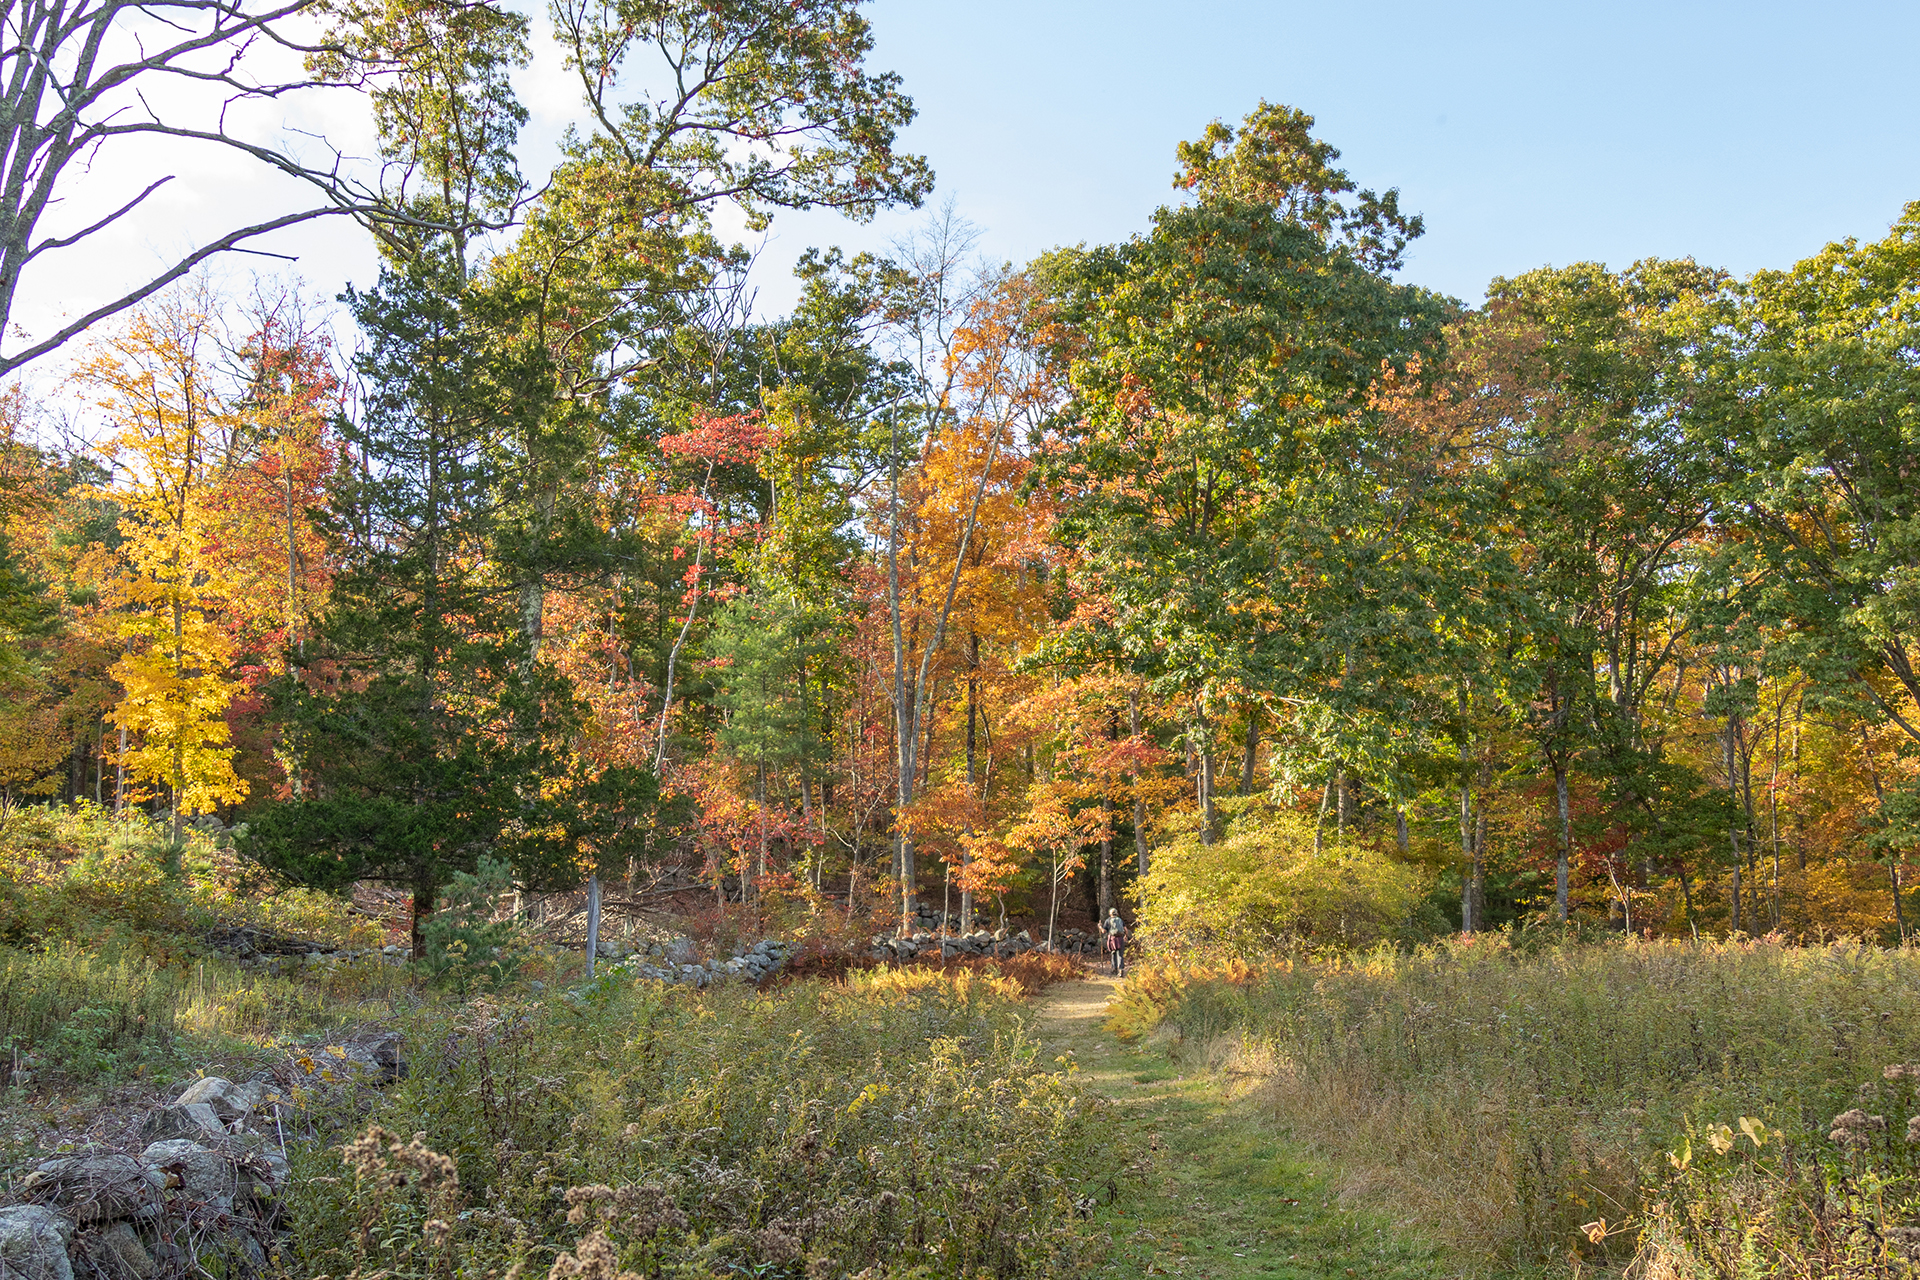 Grassy trail and stone wall in fall